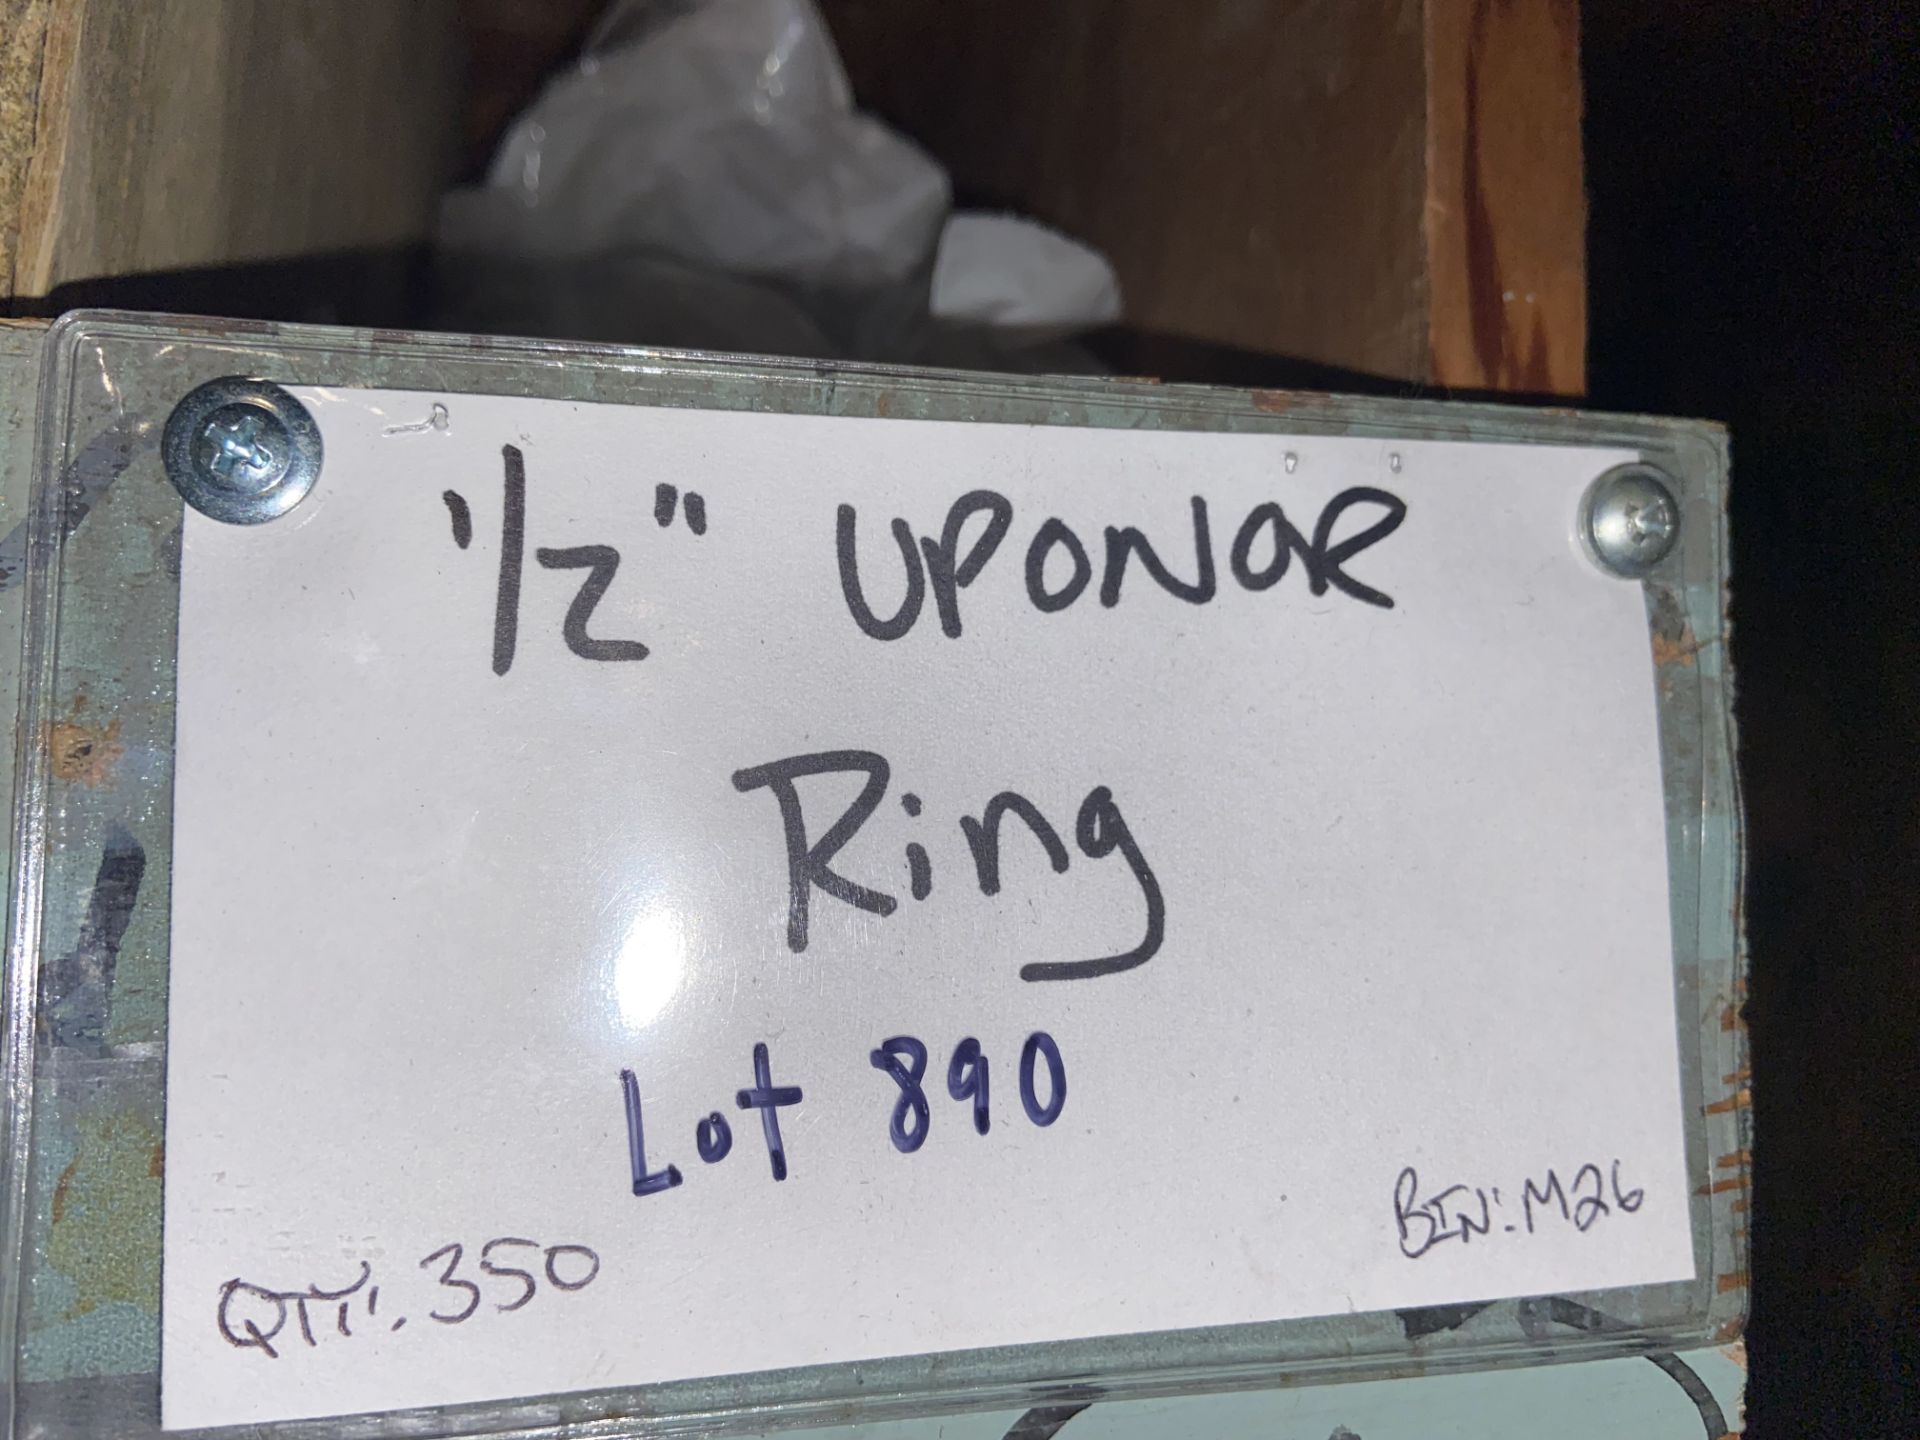 (350) 1/2” Uponor Ring (Bin:M26)(LOCATED IN MONROEVILLE, PA) - Image 2 of 2